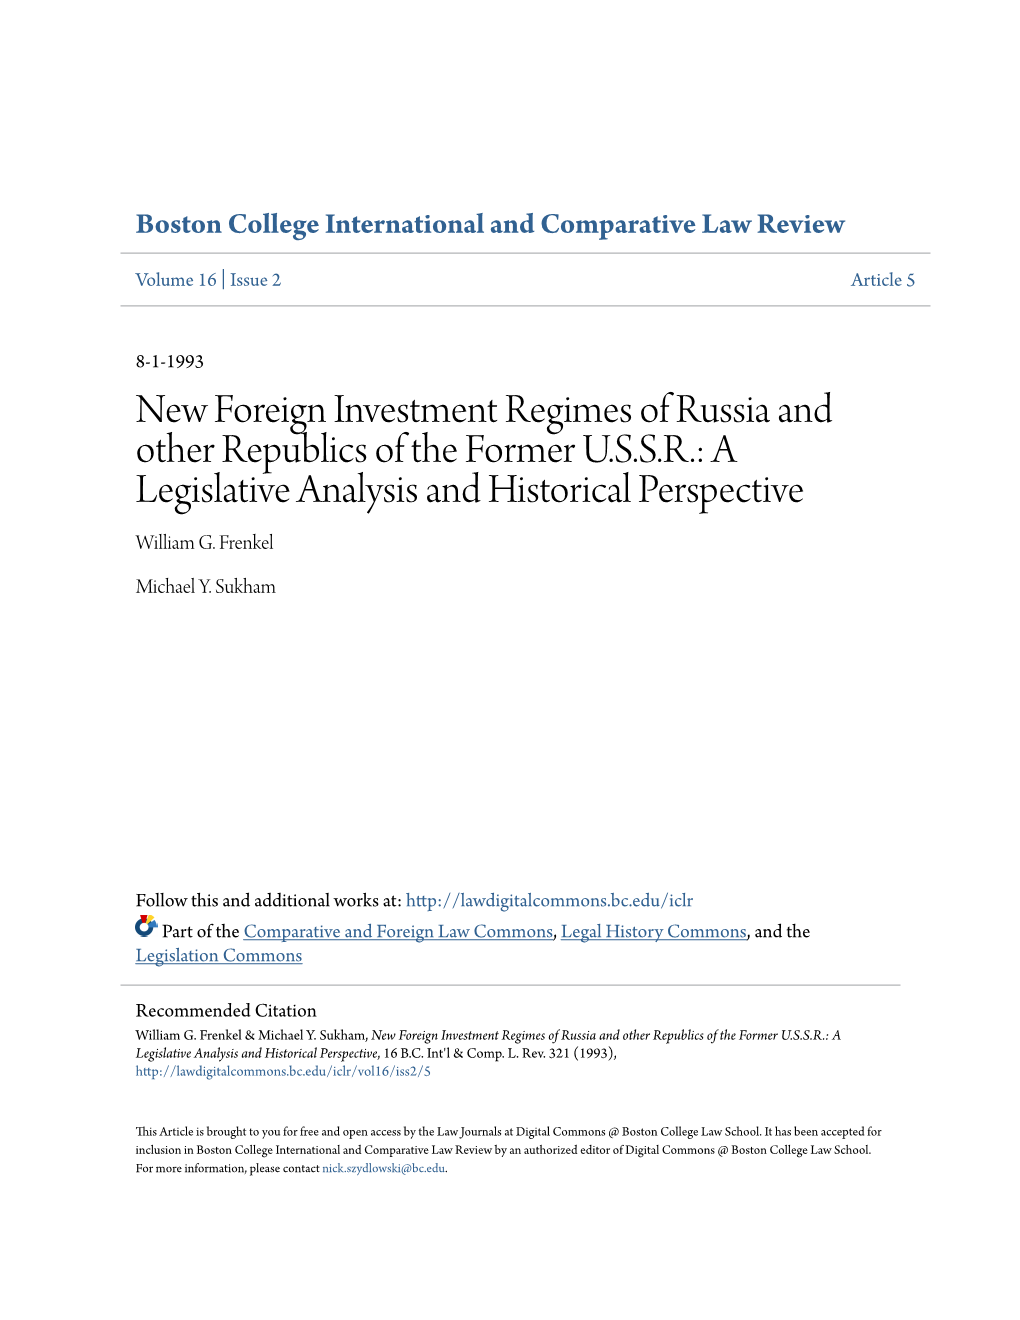 New Foreign Investment Regimes of Russia and Other Republics of the Former USSR